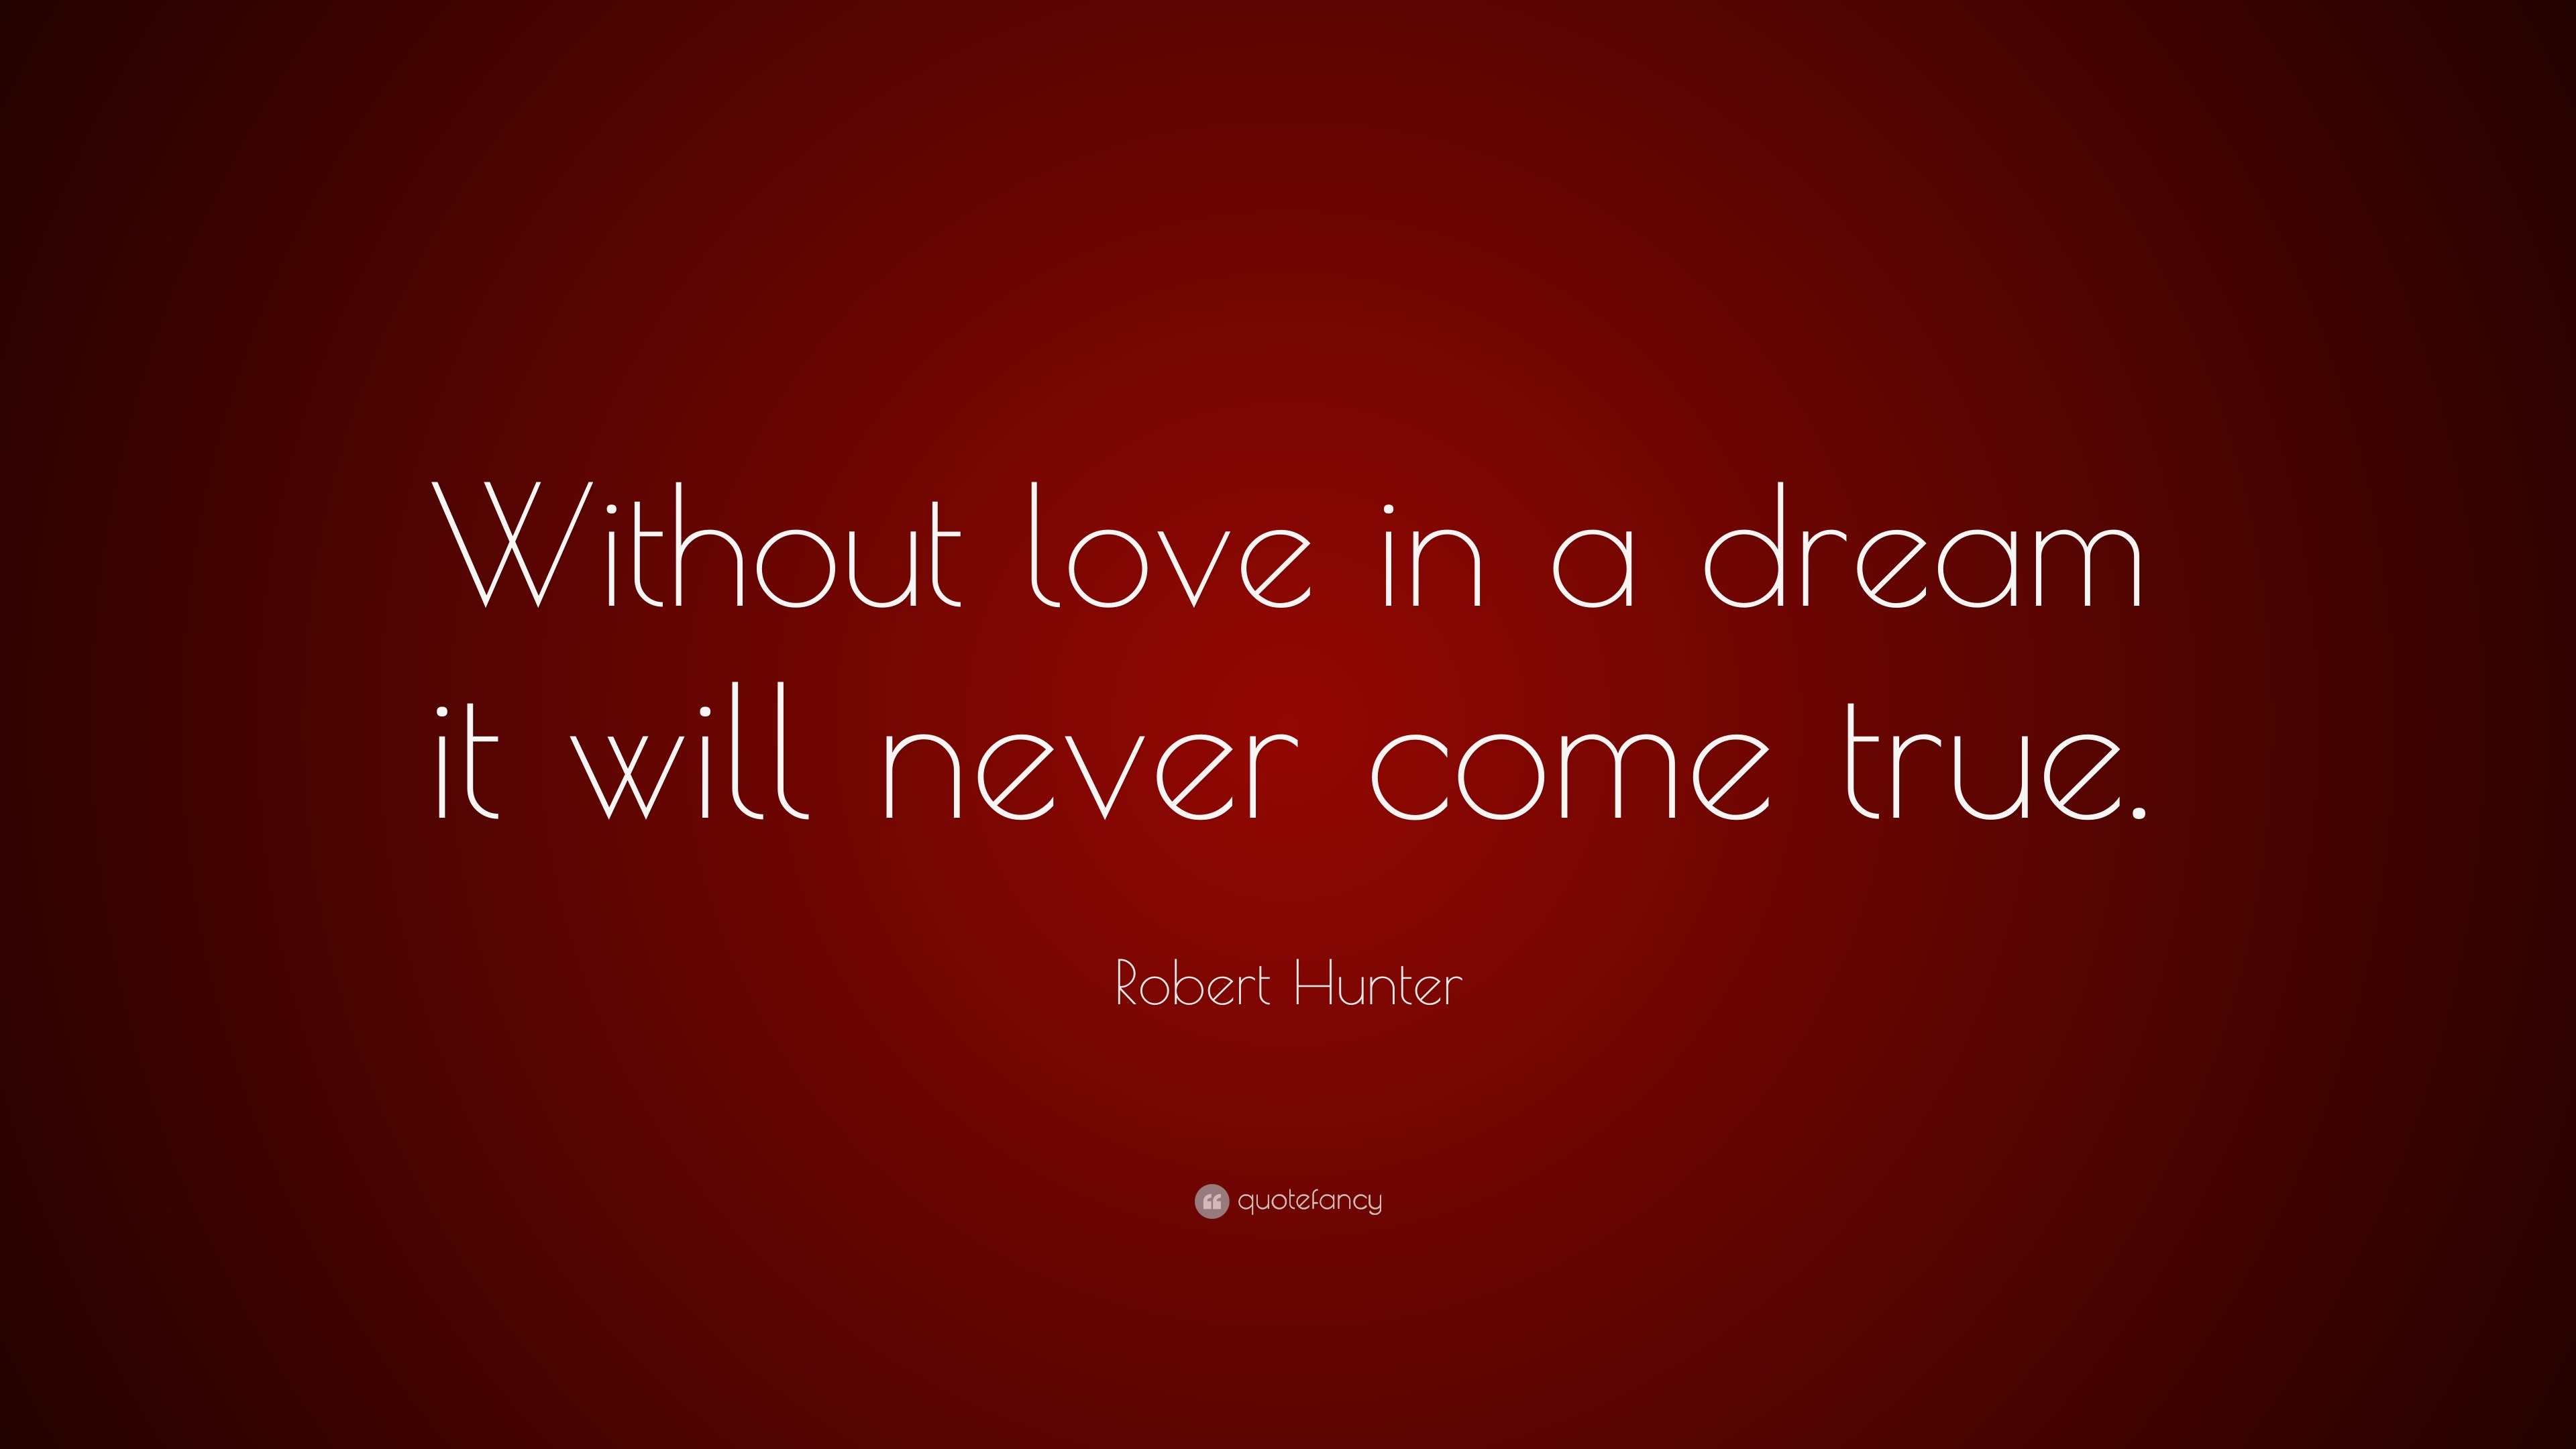 Robert Hunter Quote “Without love in a dream it will never e true